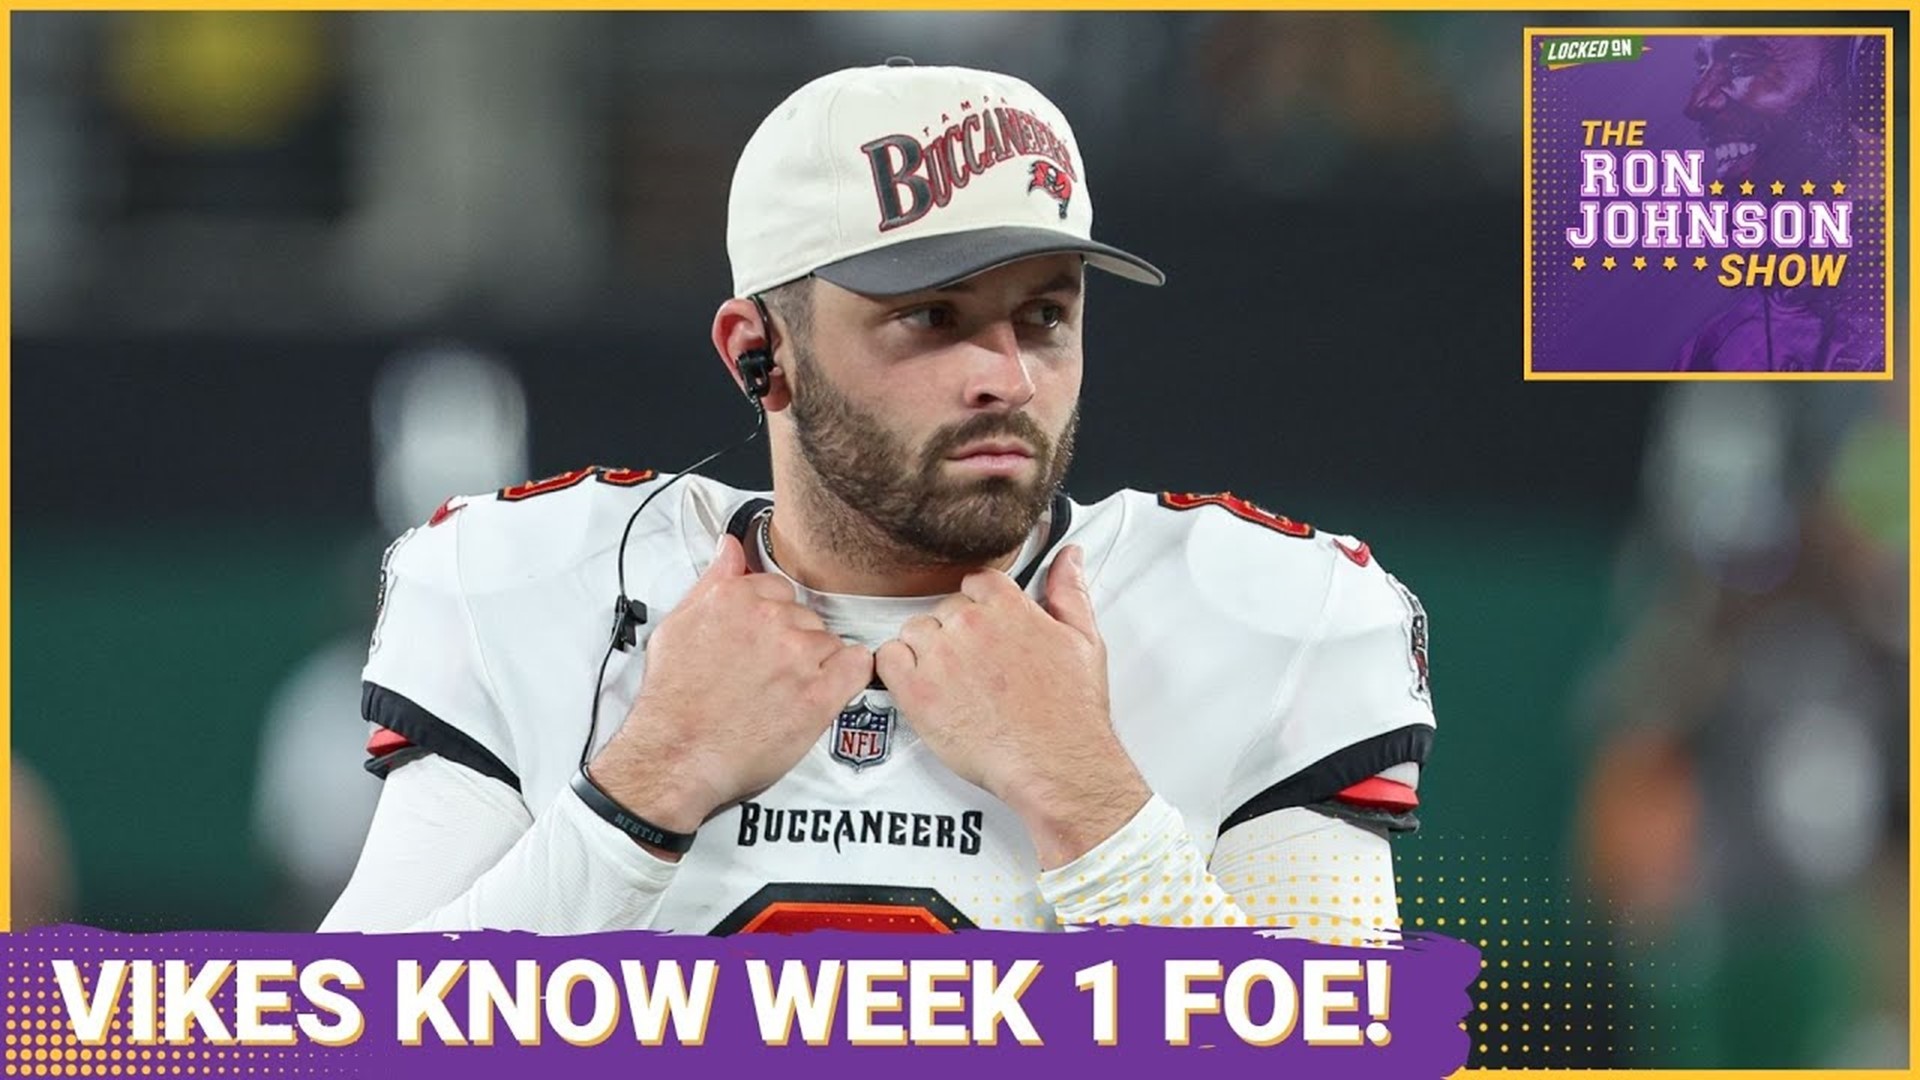 The Minnesota Vikings Get to Face BAKER MAYFIELD in Week 1 - The Ron Johnson Show